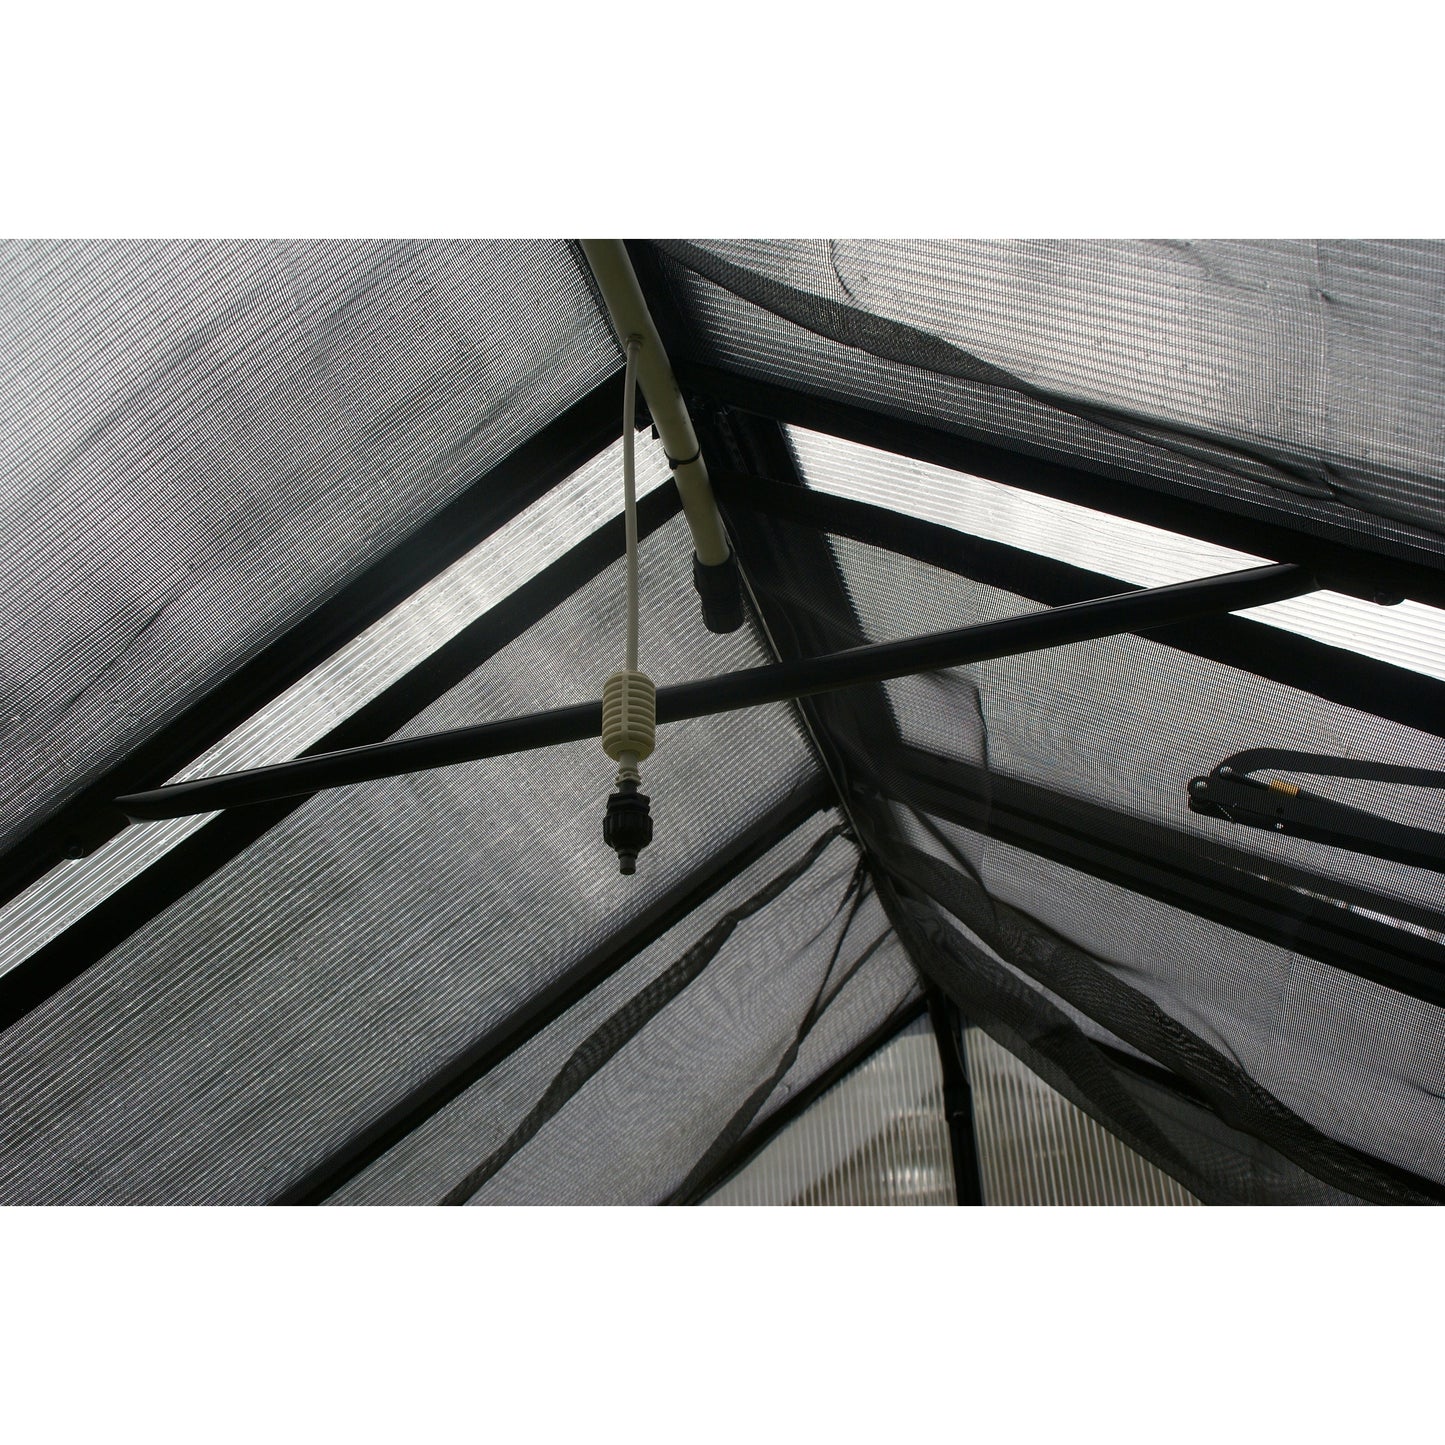 Mont Growers Edition Greenhouse 8FTx 12FT - Black Finish MONT-12-BK-GROWERS